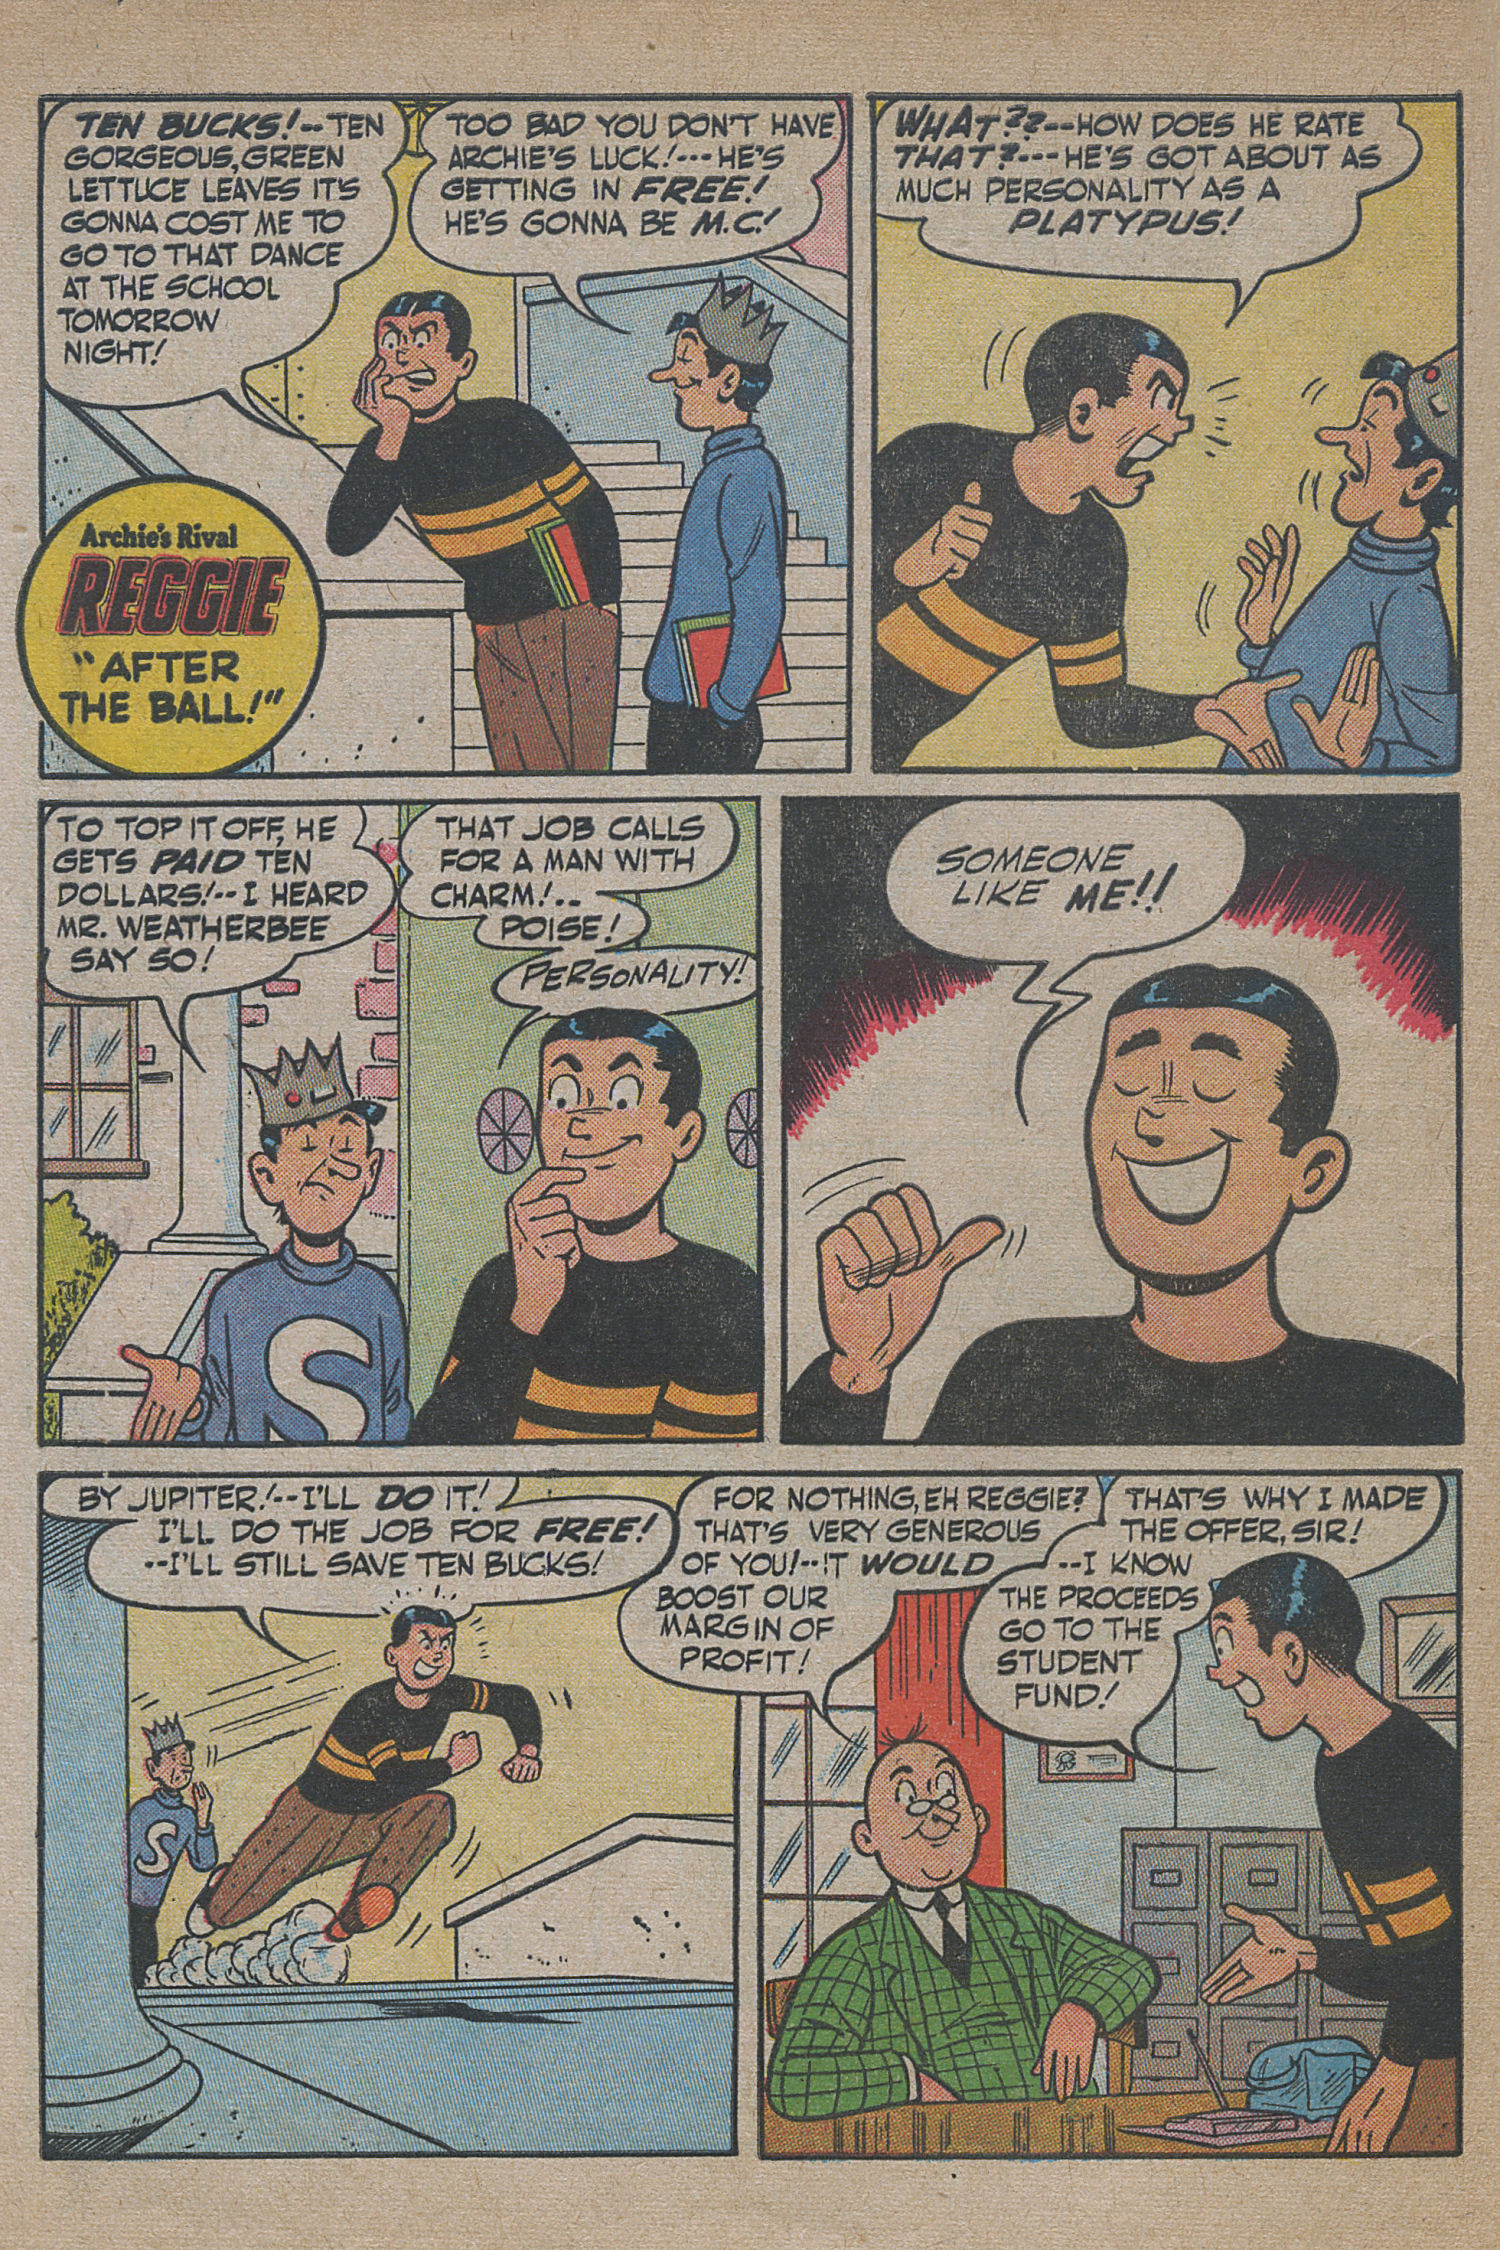 Read online Archie's Rival Reggie comic -  Issue #14 - 8